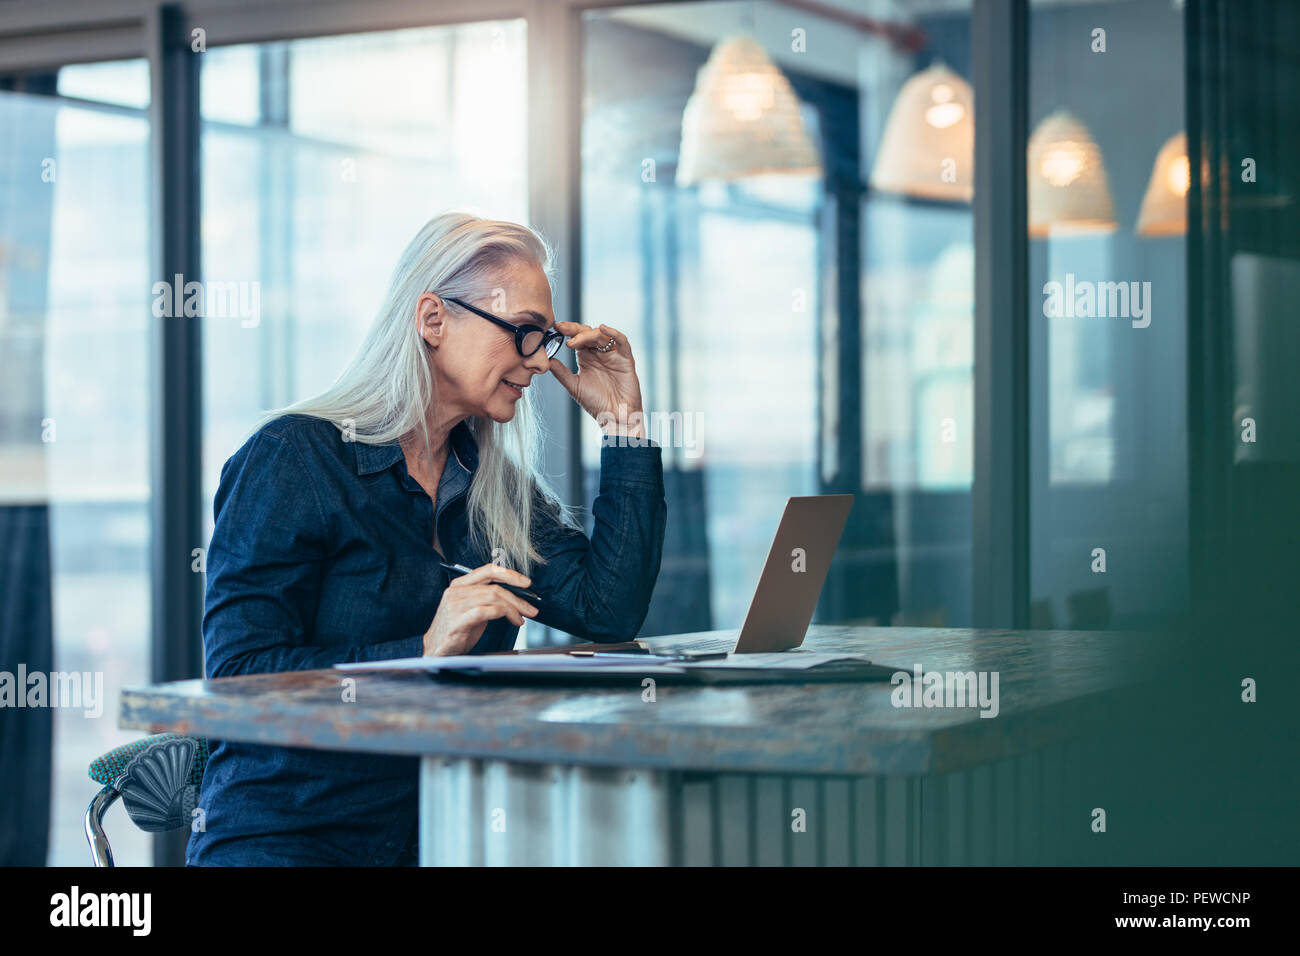 Senior business woman working on laptop in office. Caucasian mature female looking at laptop computer while sitting at her desk. Stock Photo